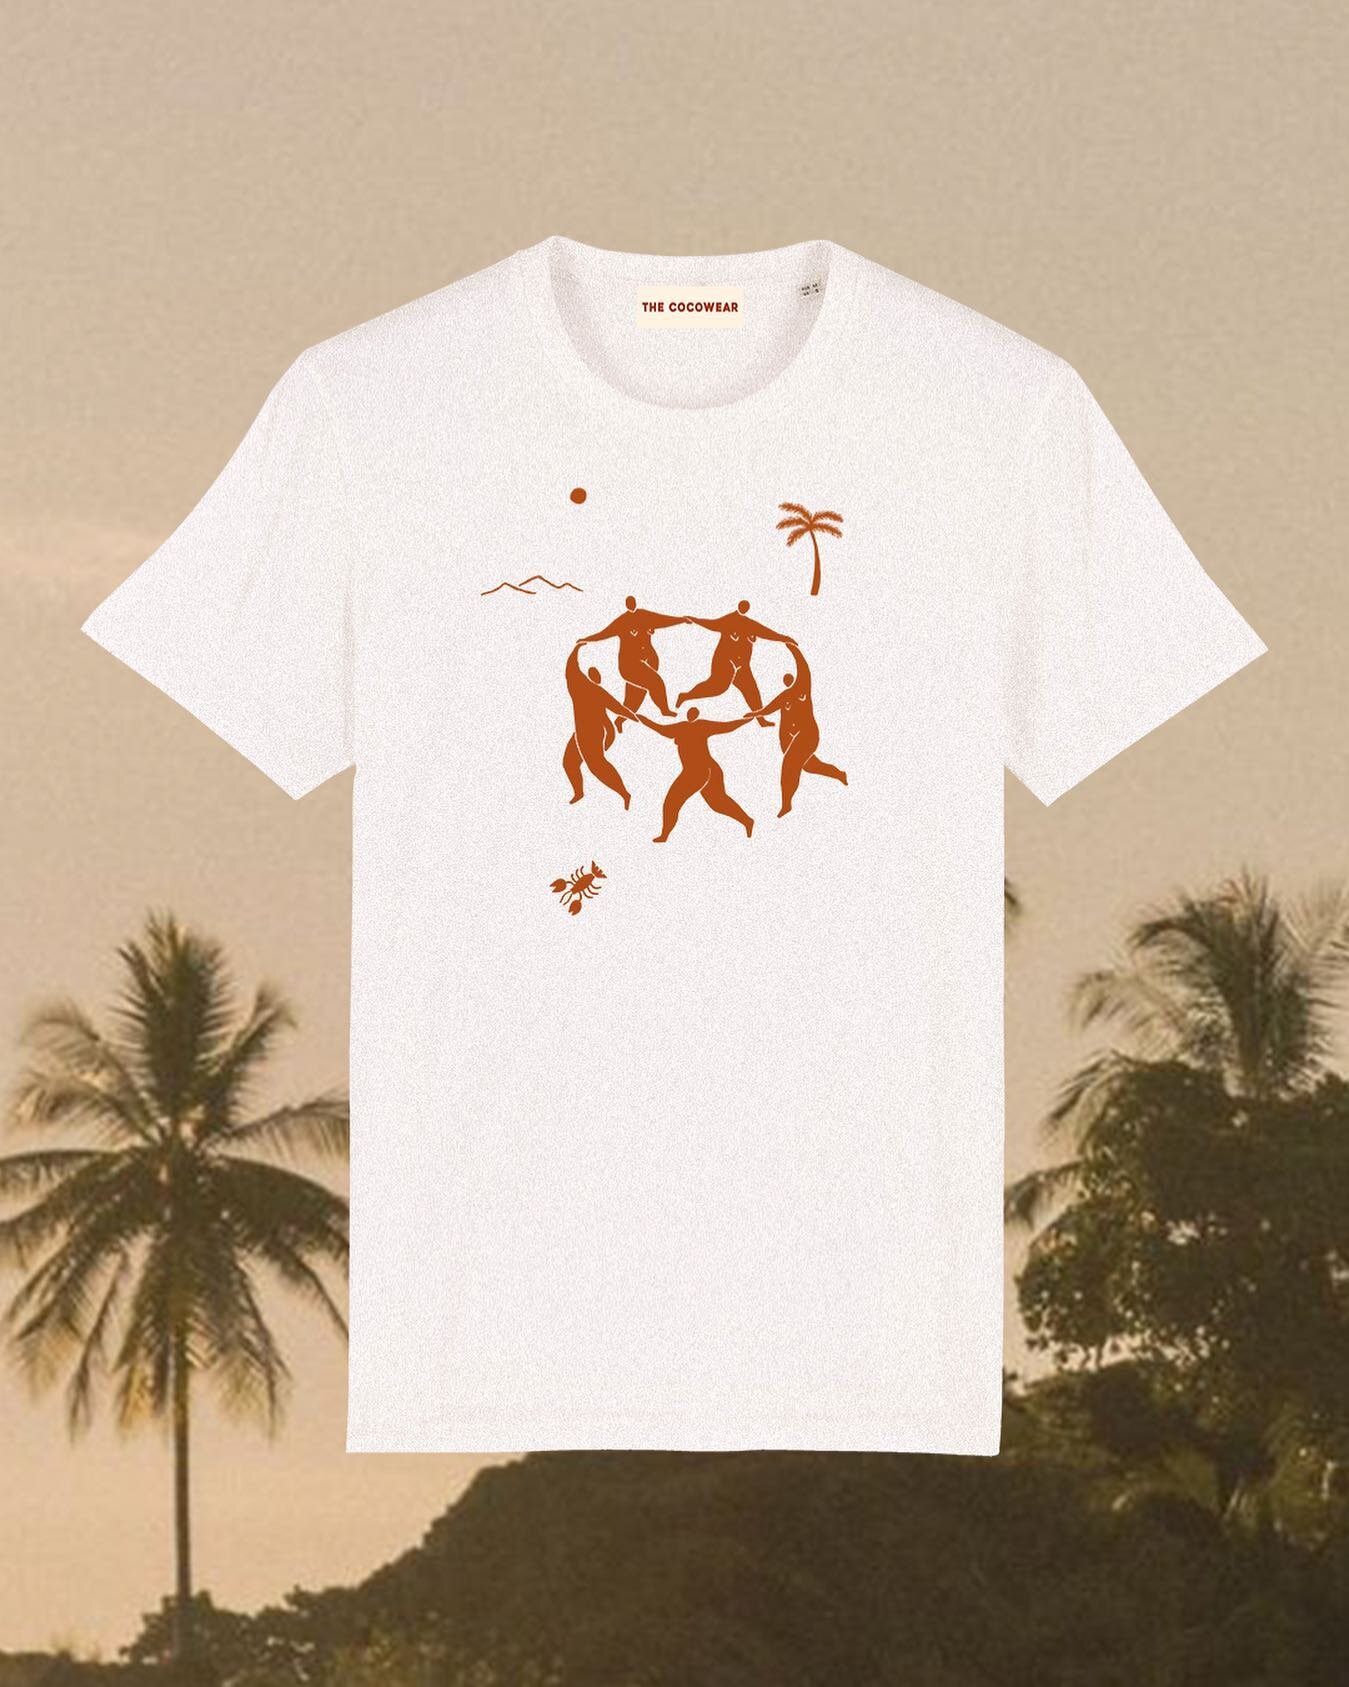 The &lsquo;Lanzarote&rsquo; T-shirt restocked 🫶🏼
🥥100% organic cotton
🥥Unisex, straight fit
🥥Off-white
🥥DM or get online thecocowear.com